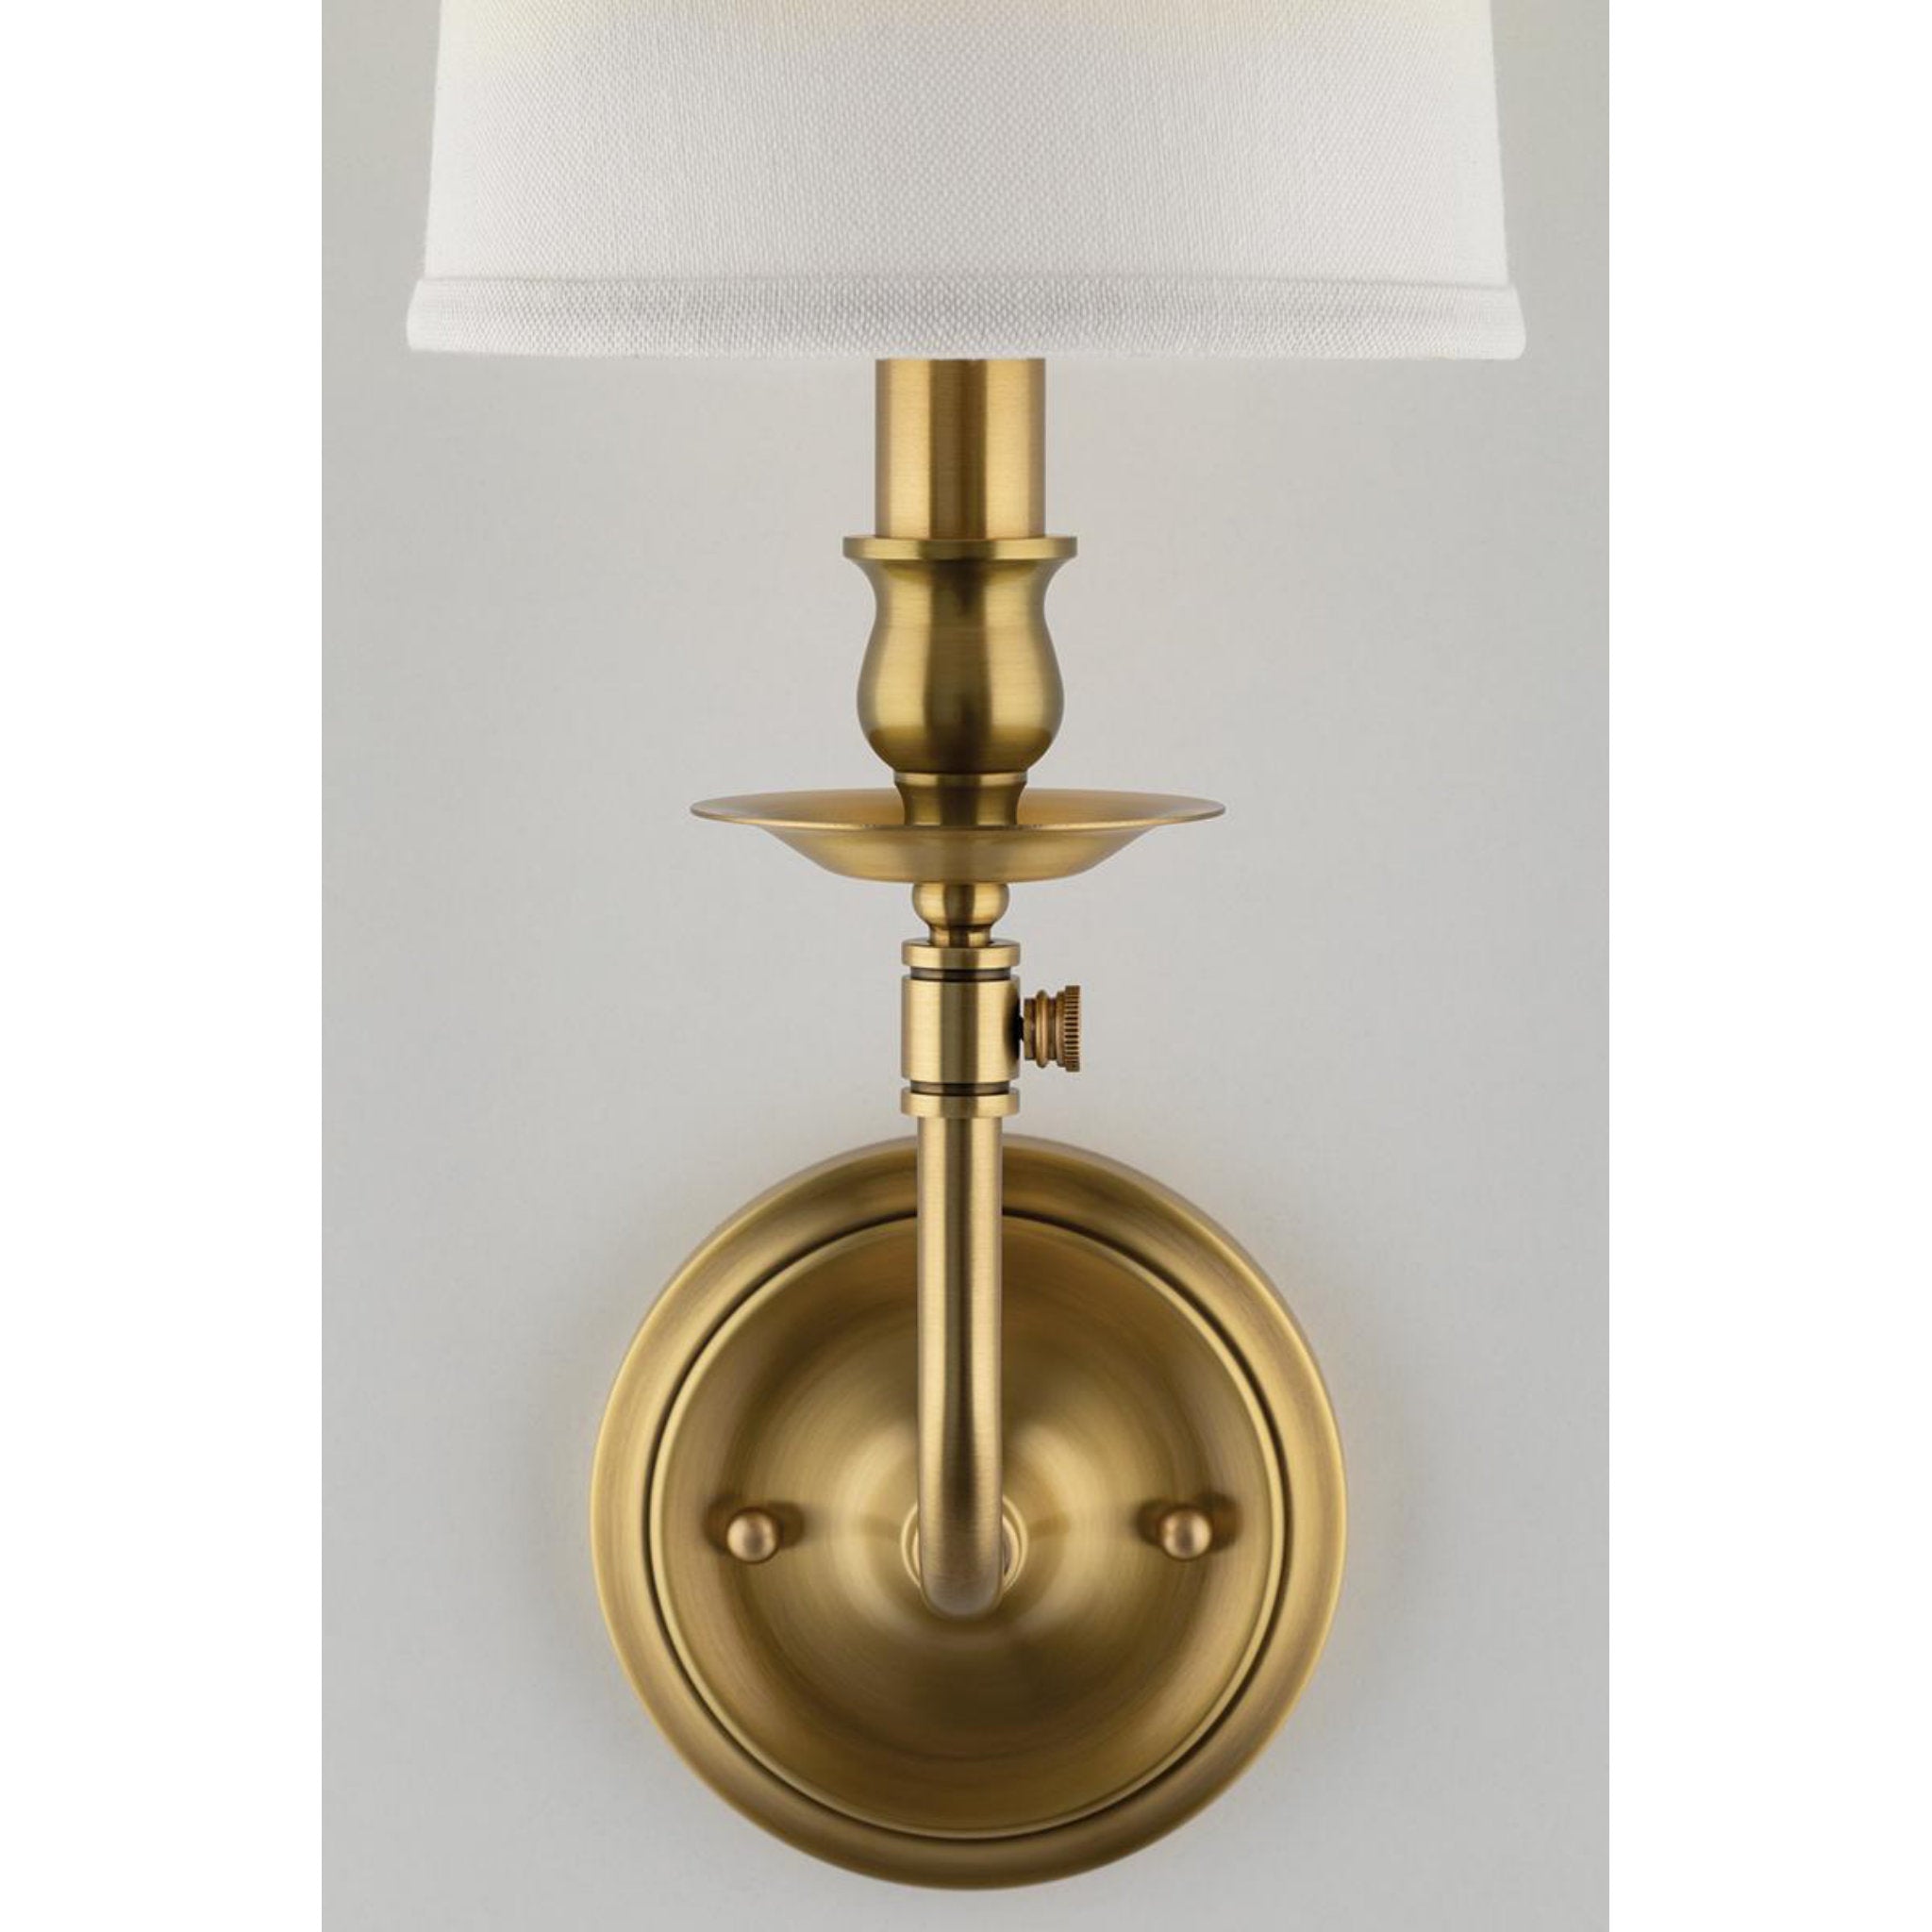 Logan 1 Light Wall Sconce in Old Bronze